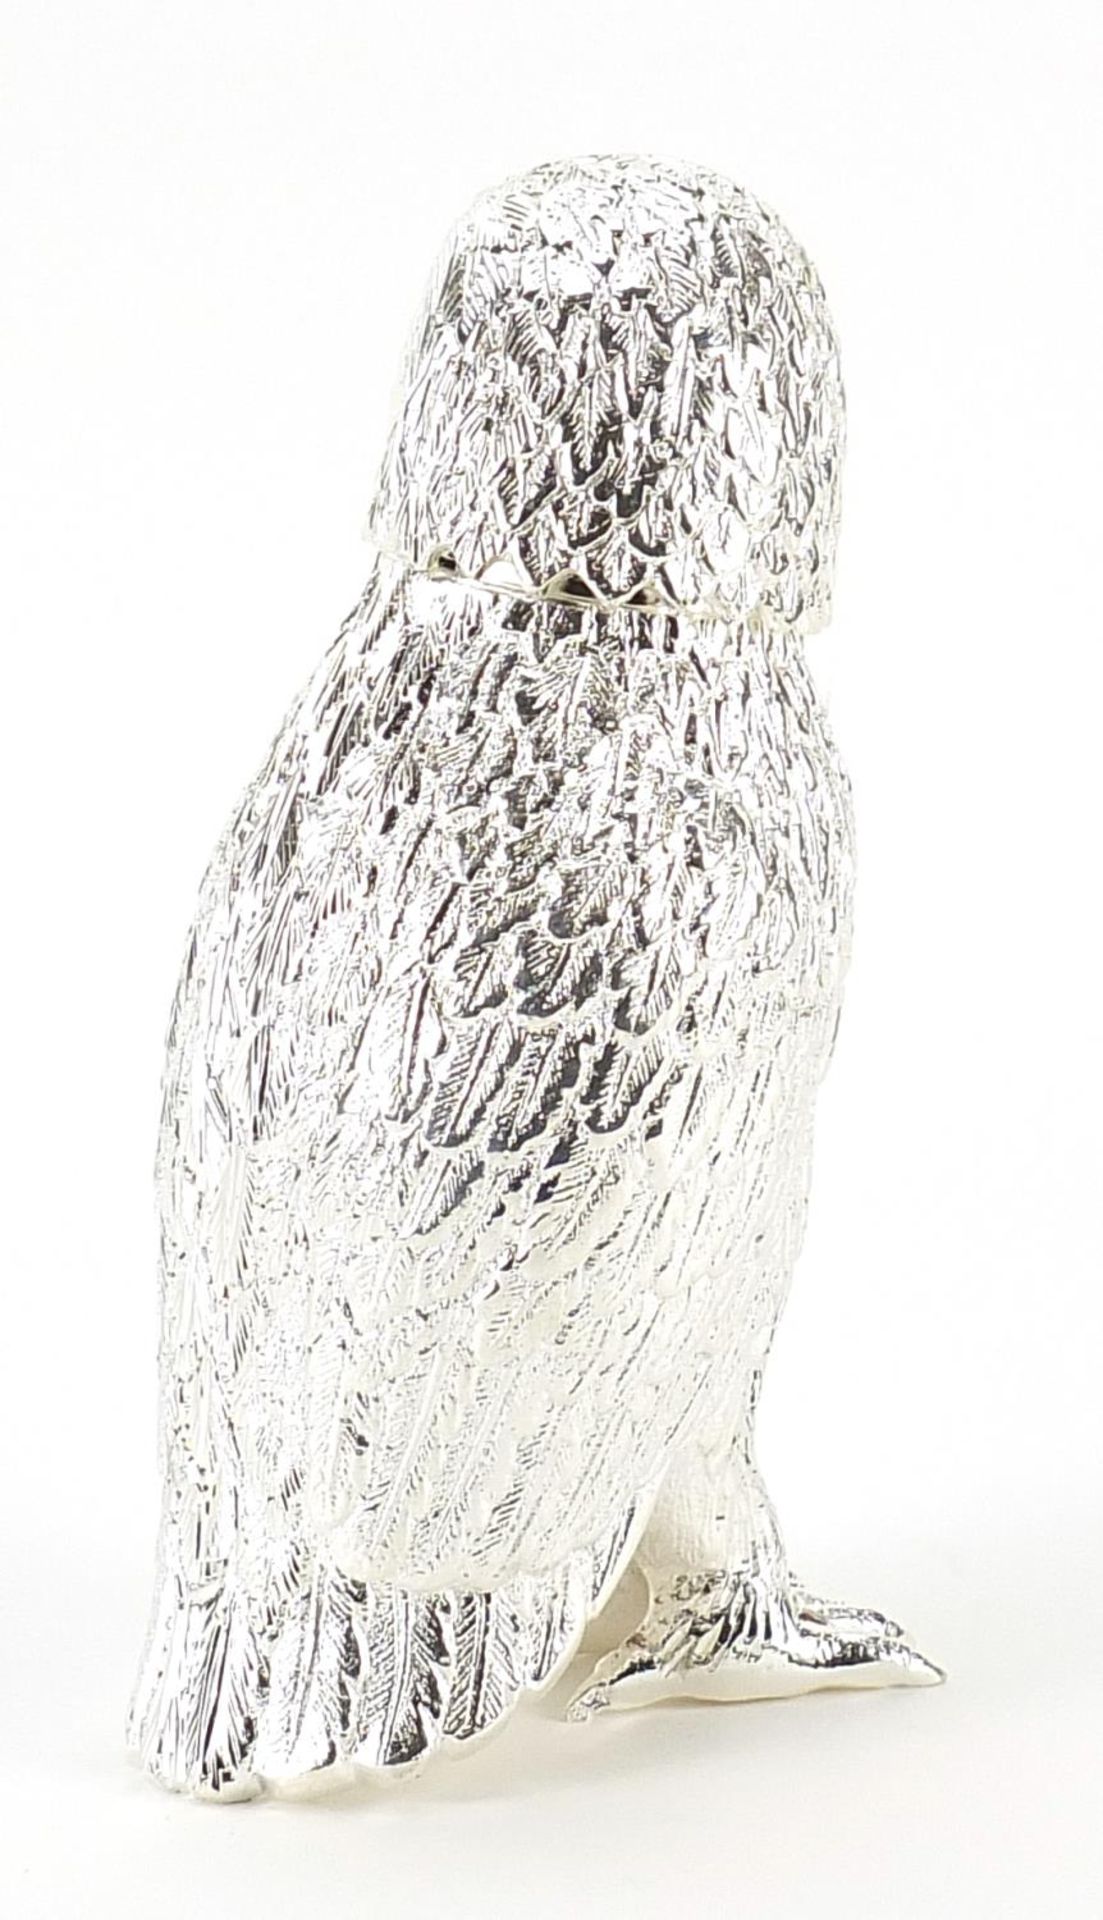 Silver plated owl design pepperette, 16cm high - Image 2 of 4